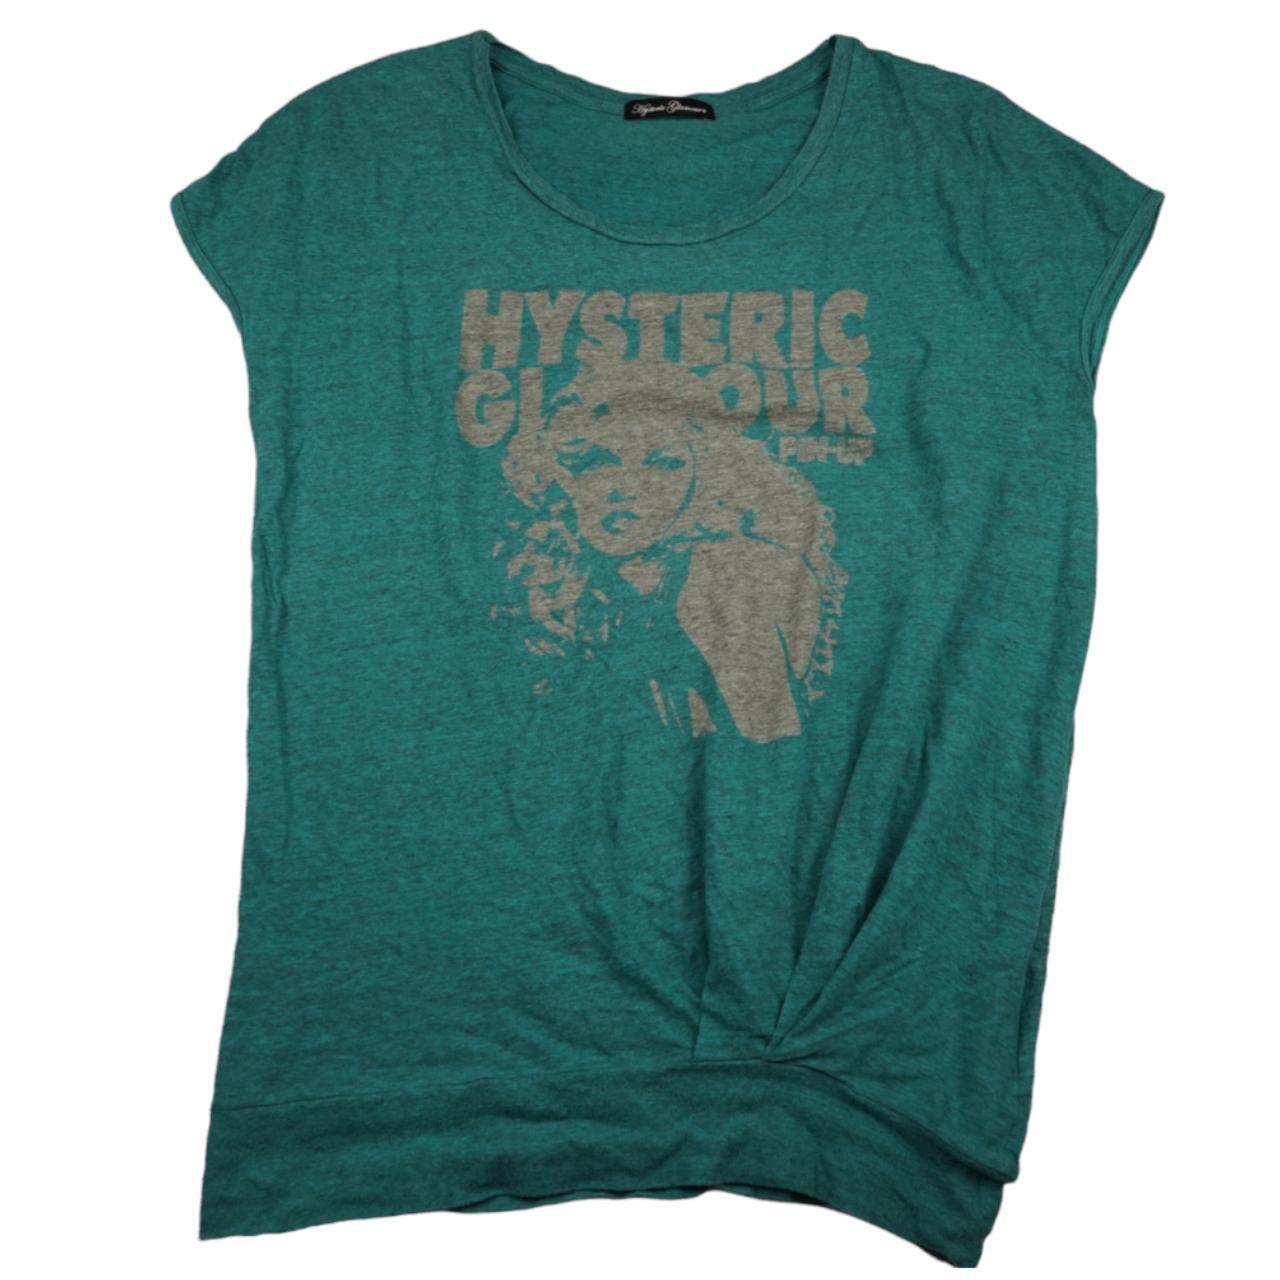 Product Image 2 - Hysteric Glamour Graphic Top

- Blue